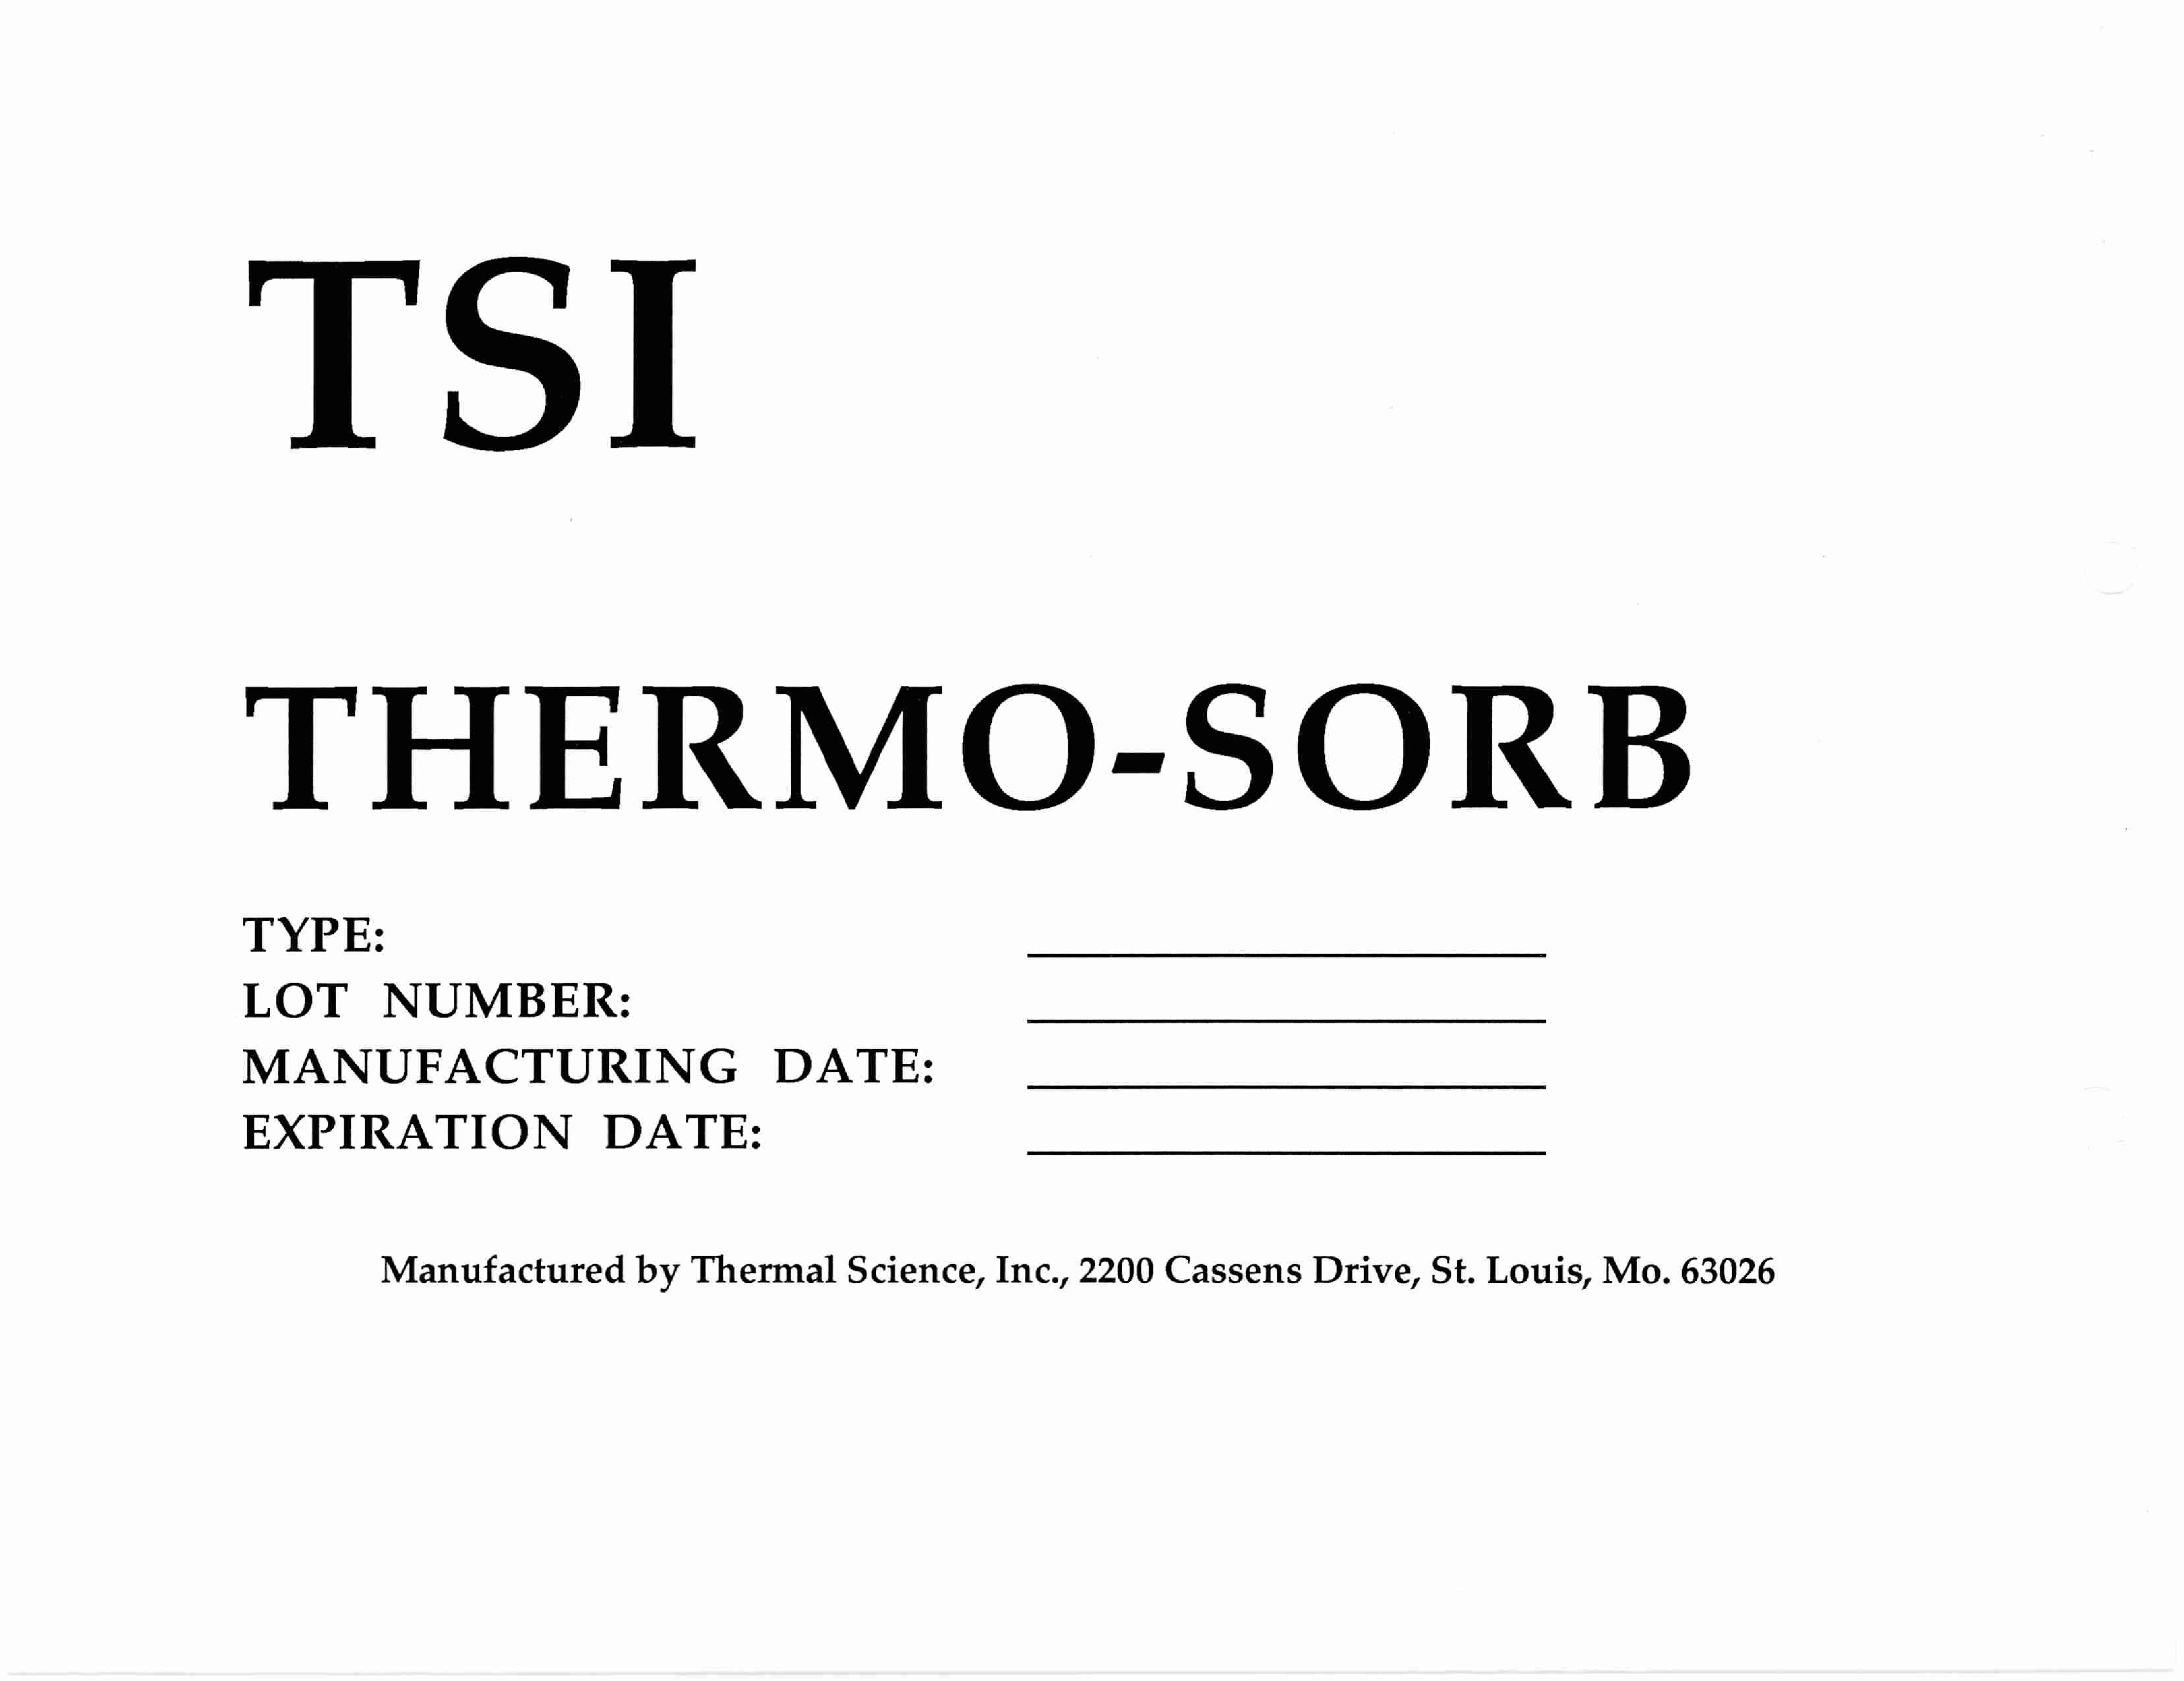  THERMO-SORB